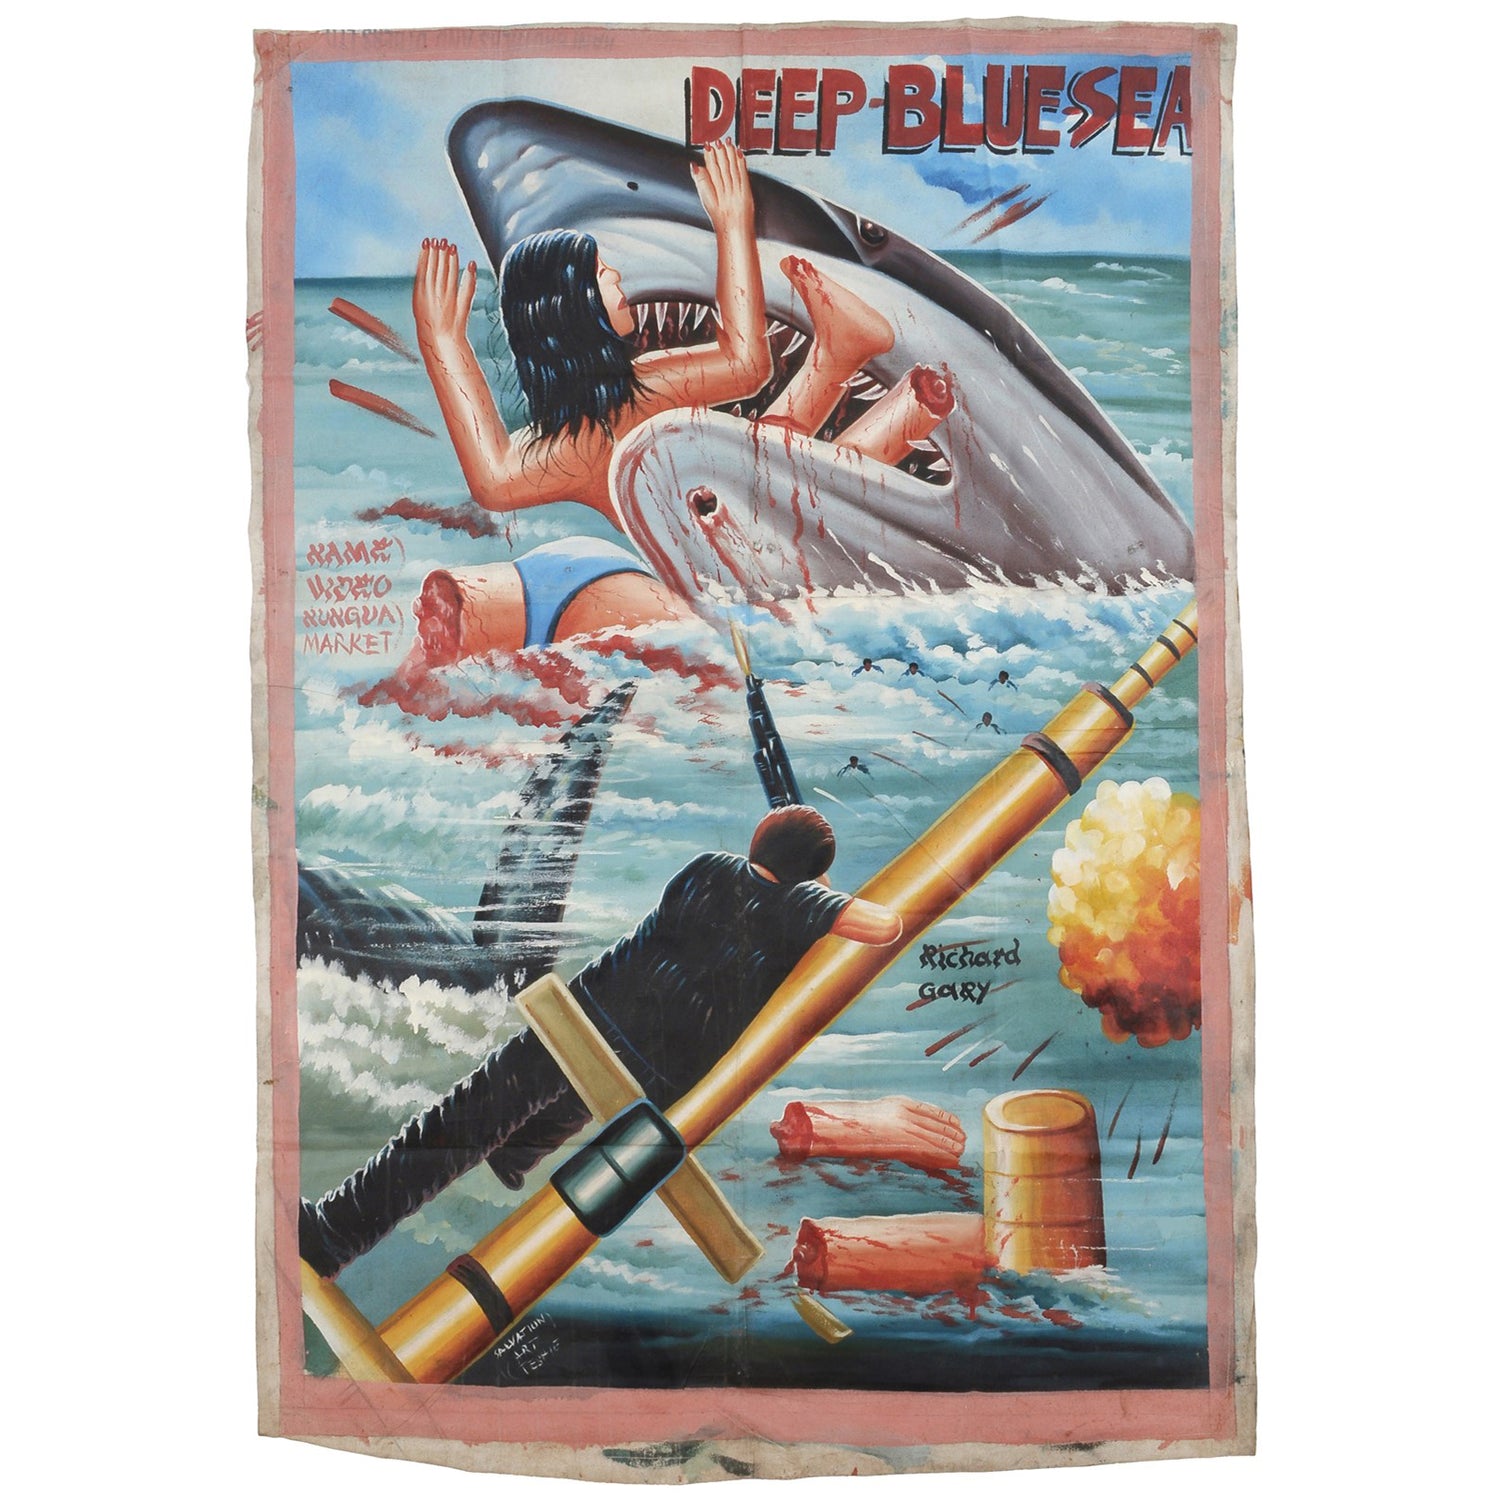 DEEP BLUE SEA MOVIE POSTER HAND PAINTED IN GHANA FOR THE LOCAL CINEMA